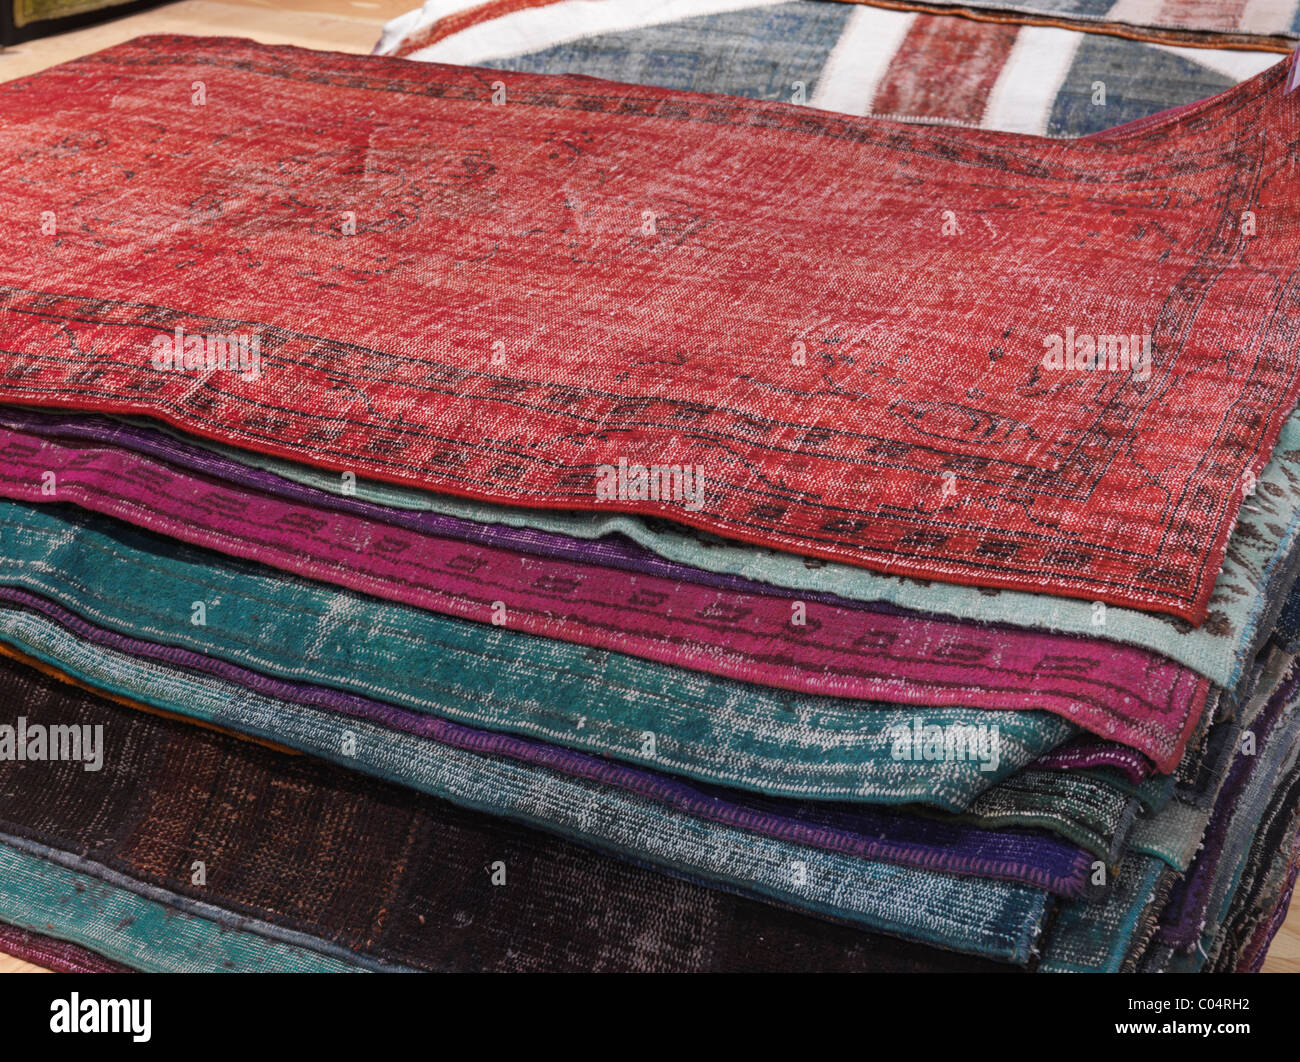 Pile of colorful vintage carpets Stock Photo